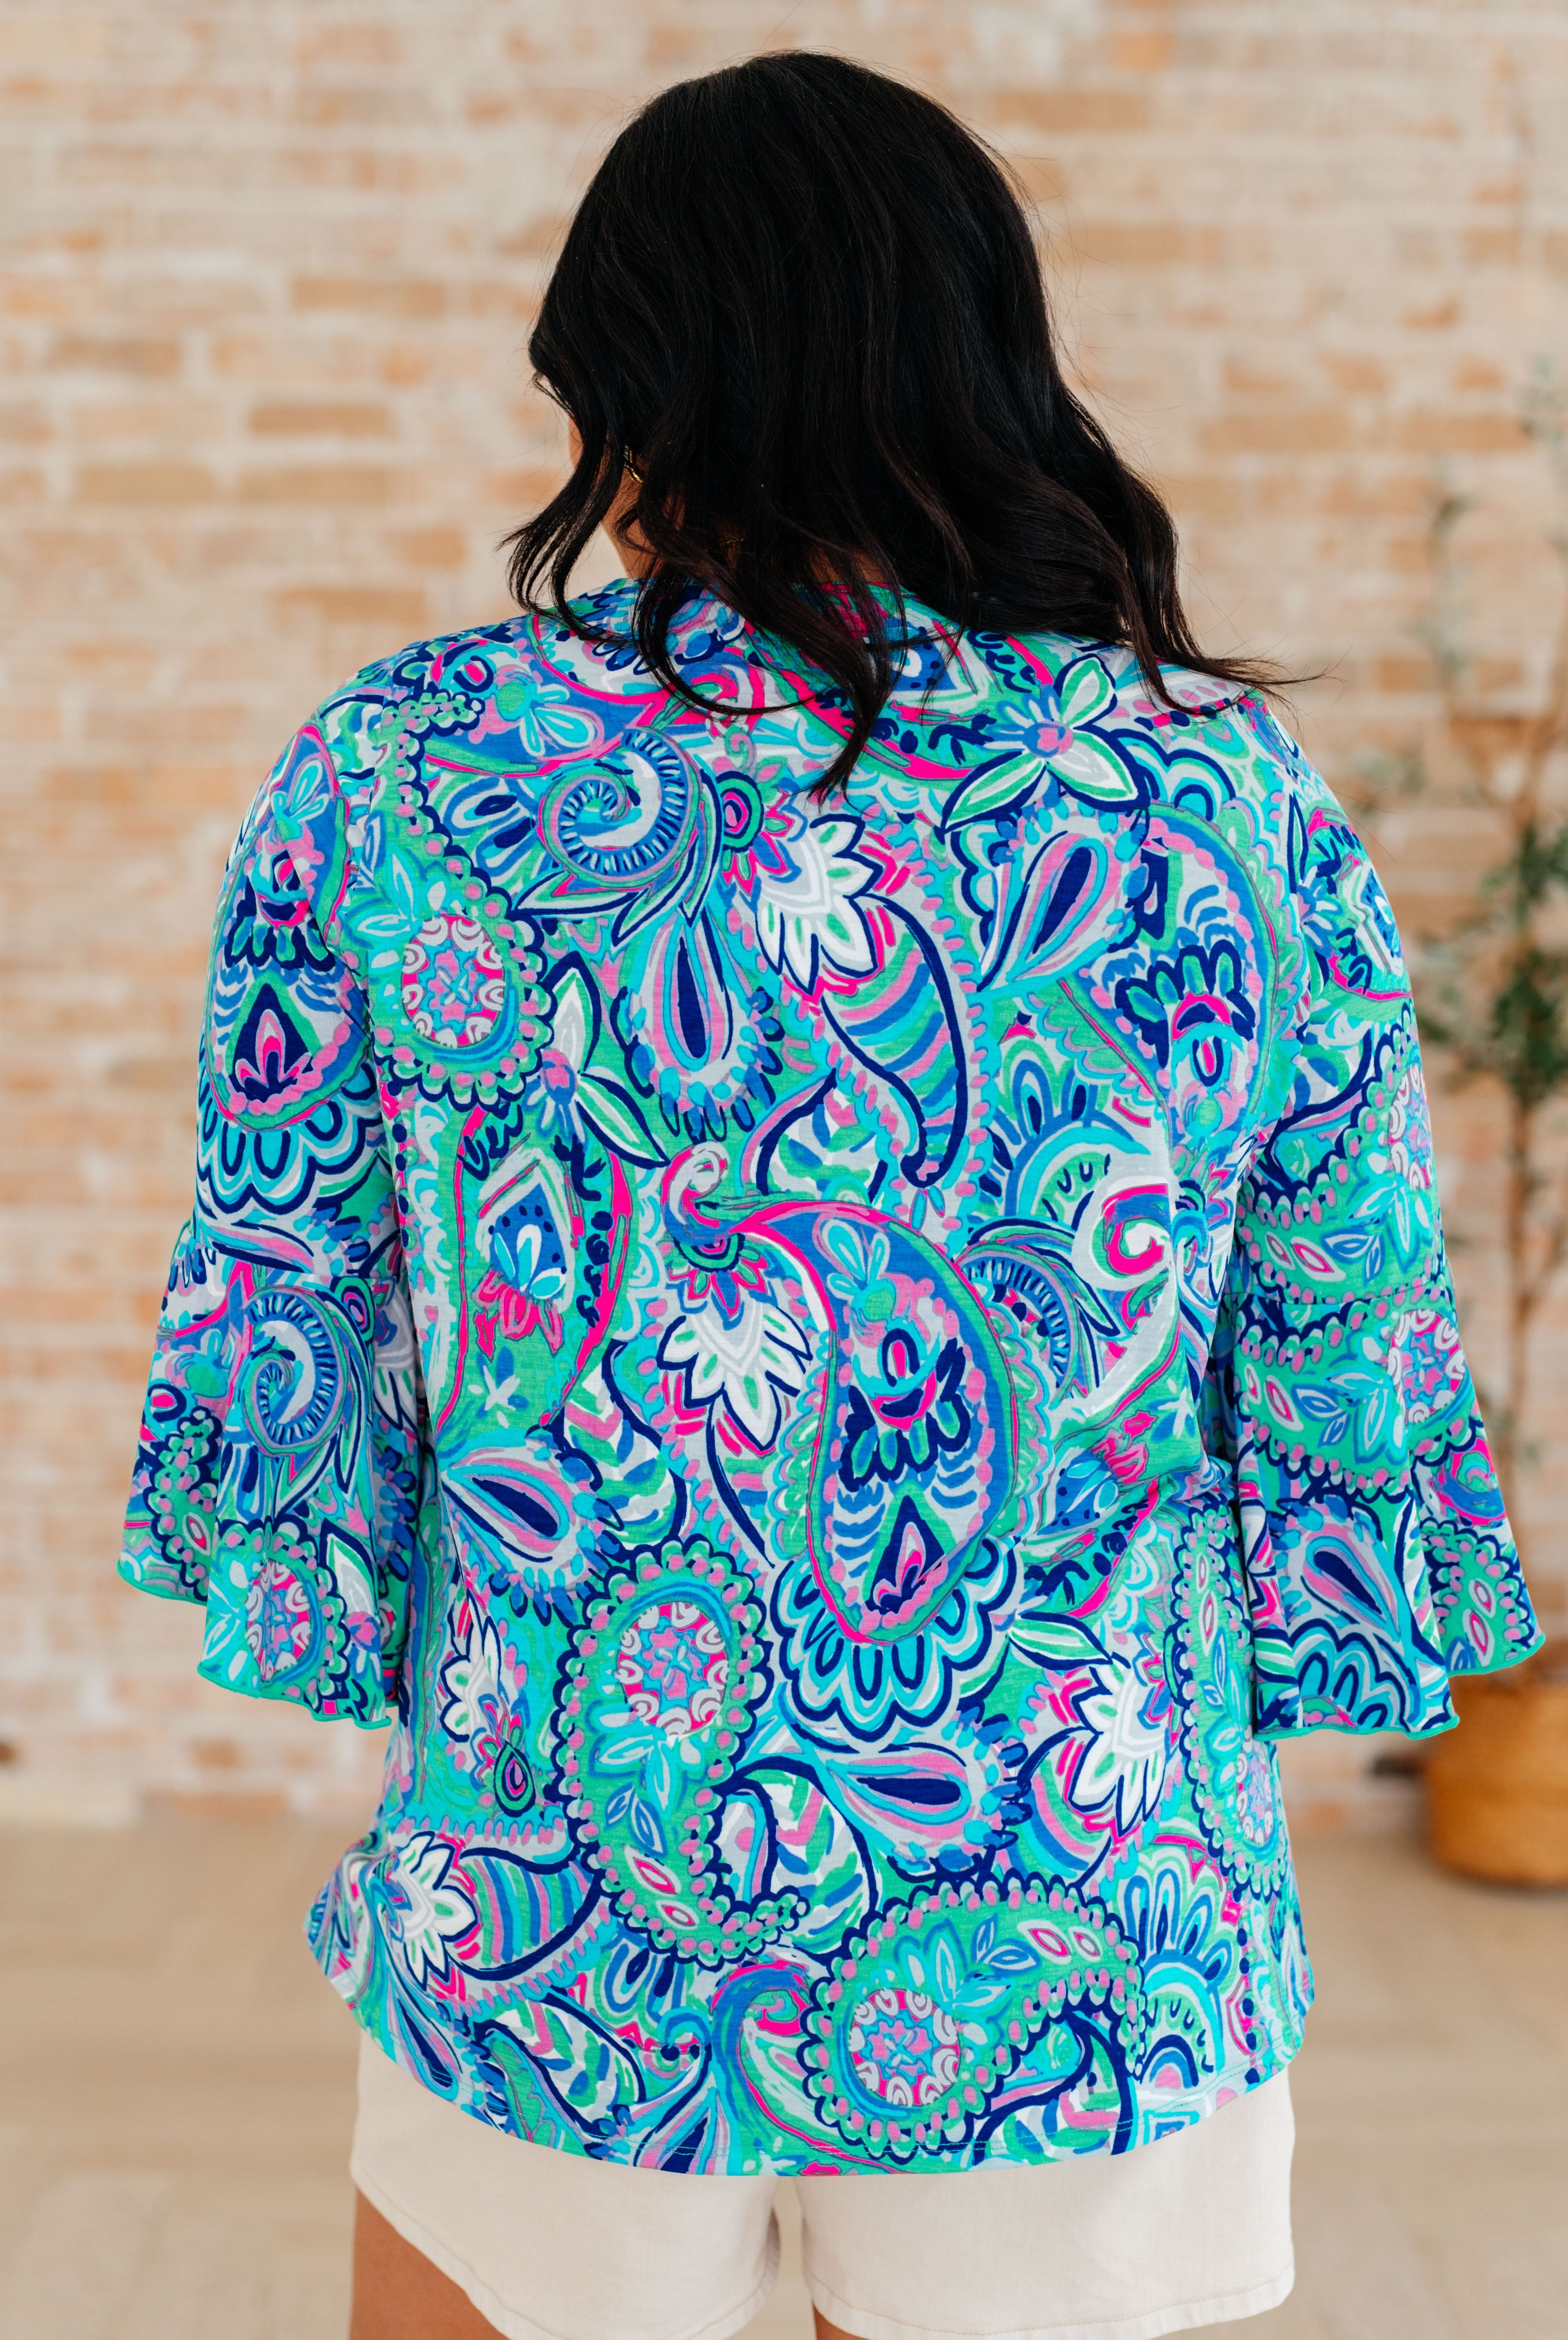 Willow Bell Sleeve Top in Emerald and Royal Paisley-Tops-Ave Shops-Urban Threadz Boutique, Women's Fashion Boutique in Saugatuck, MI